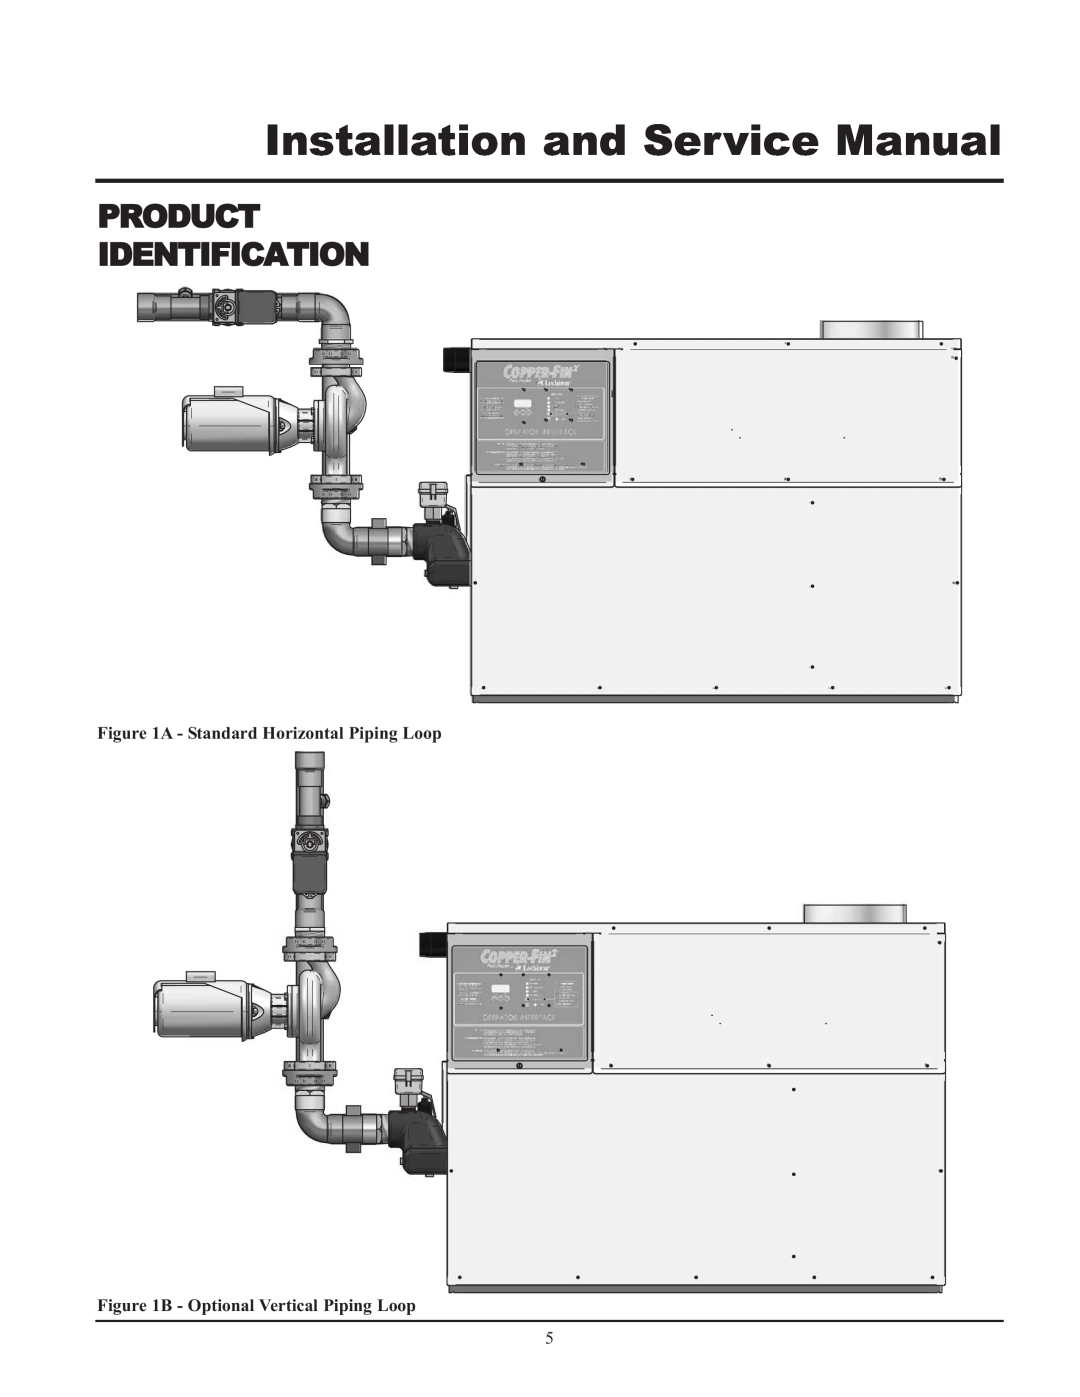 Lochinvar GAS HEATER FOR COMMERICAL POOL APPLICATIONS Product Identification, Installation and Service Manual 